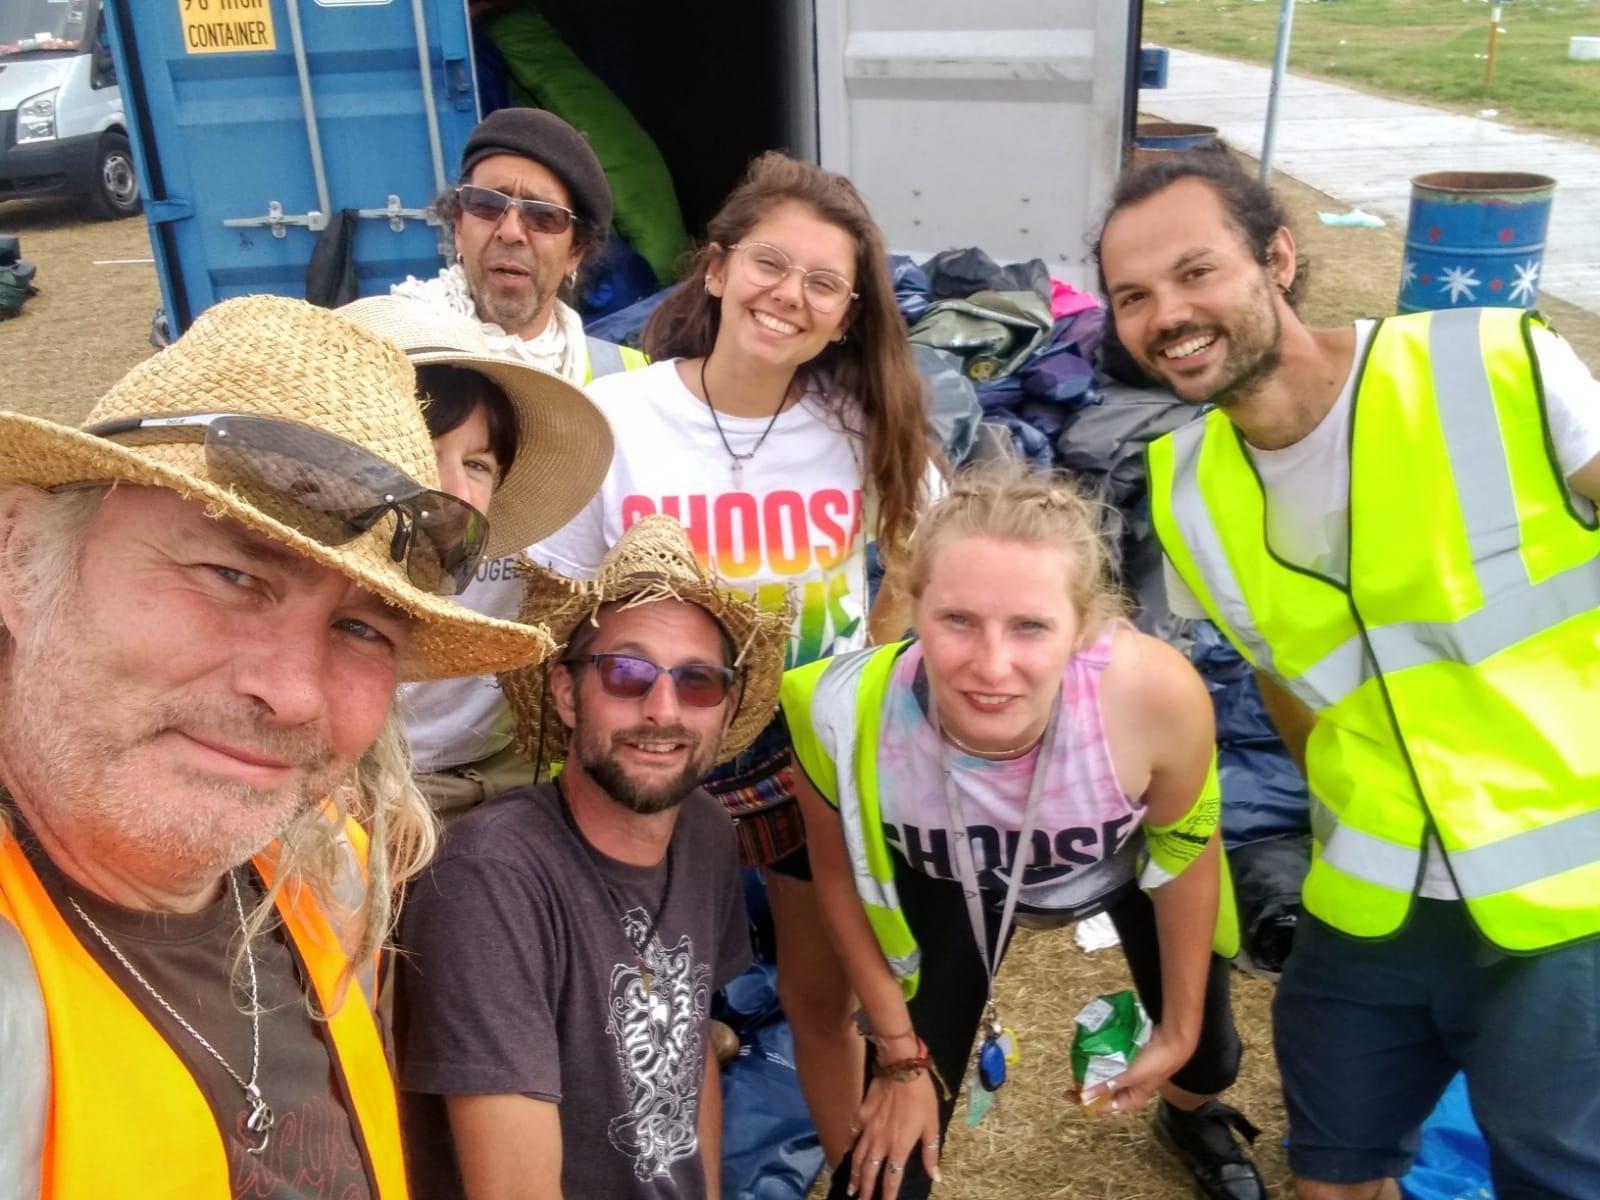 These Charities Found a Genius Way to Use Festival Leftovers